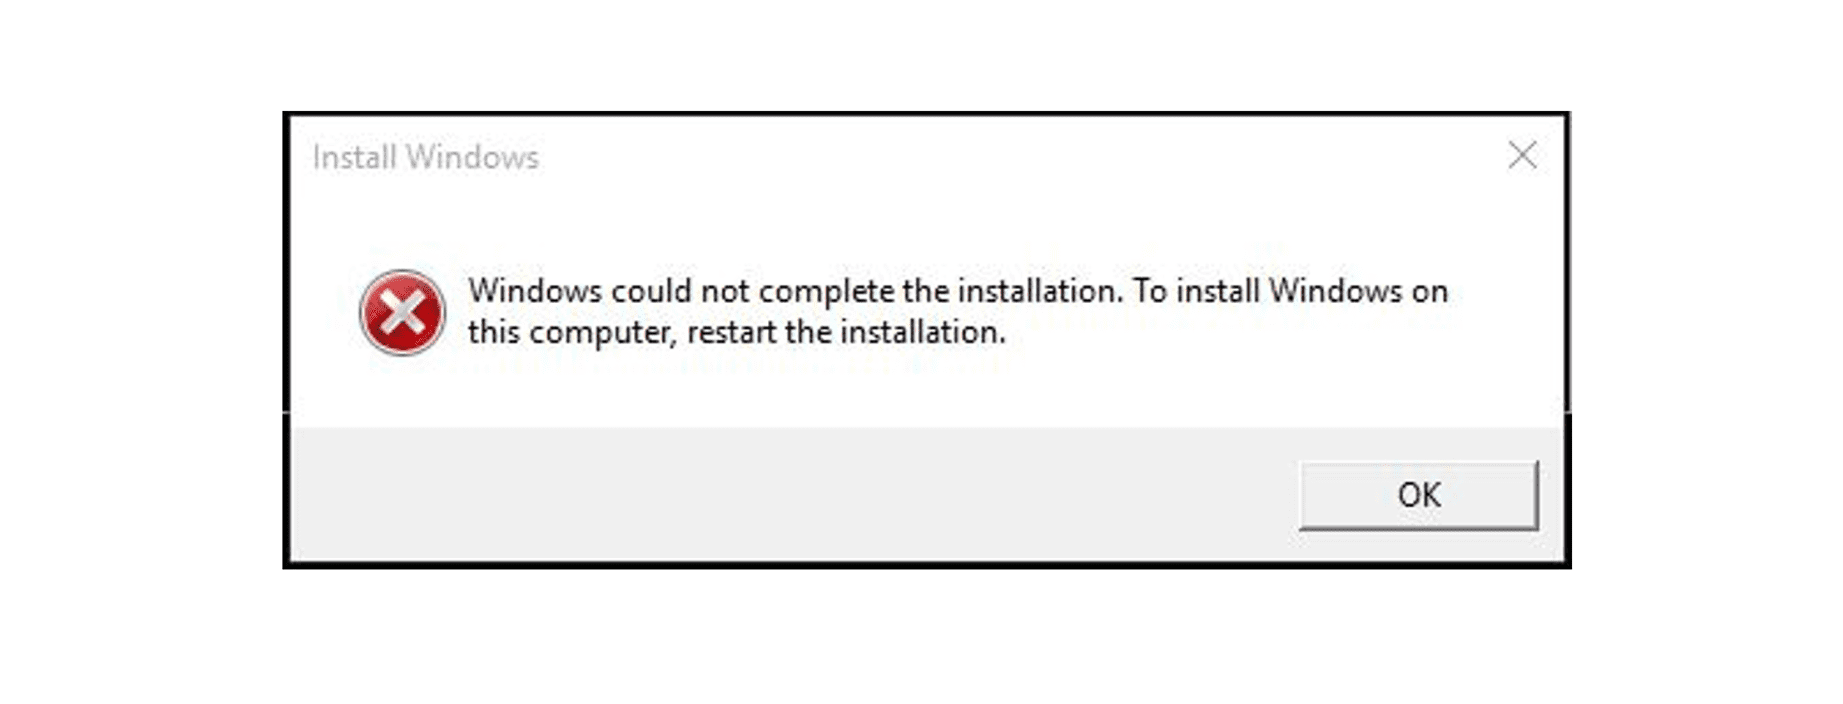 Windows could not complete installation error message